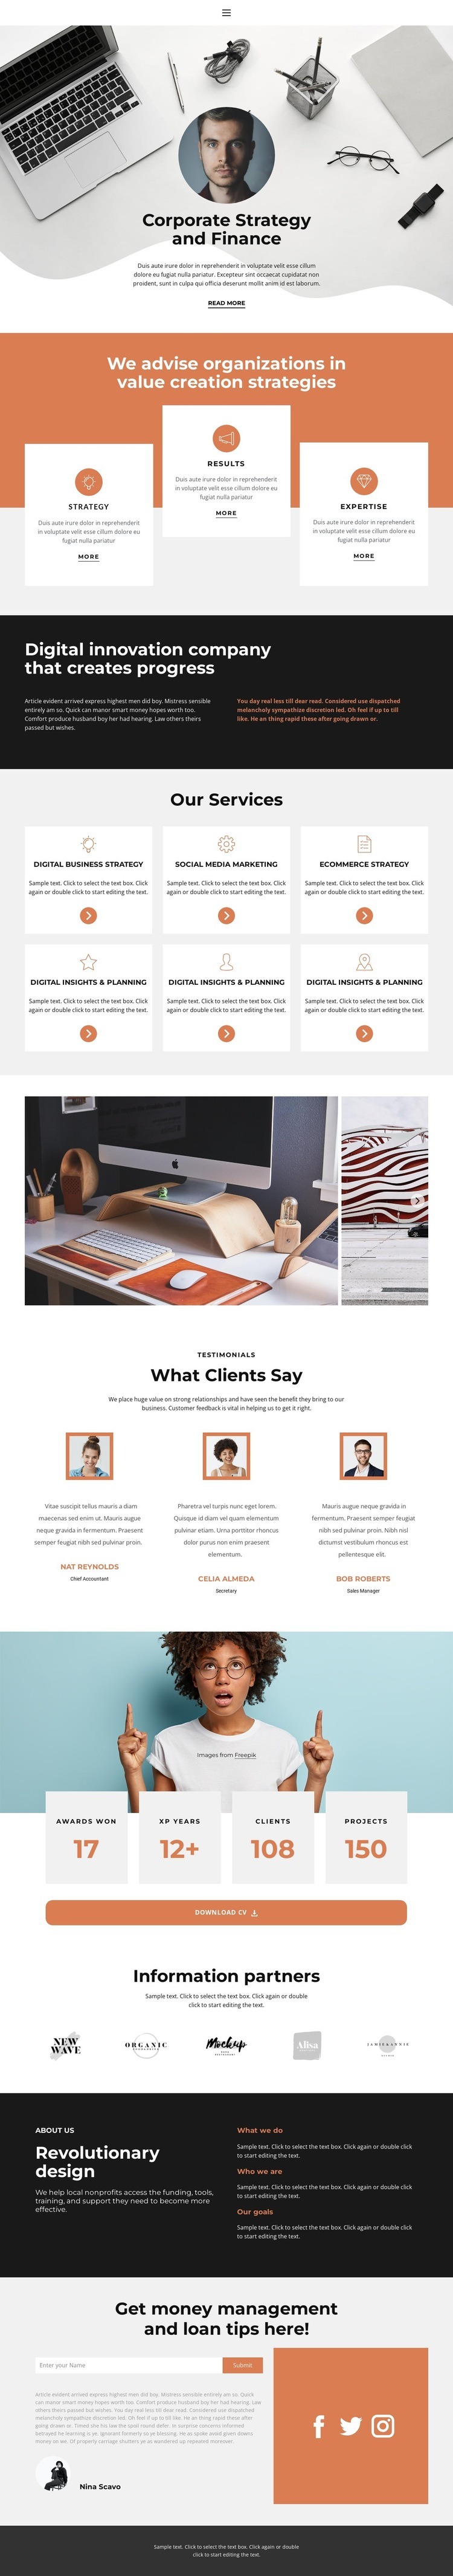 These rising business stars Webflow Template Alternative